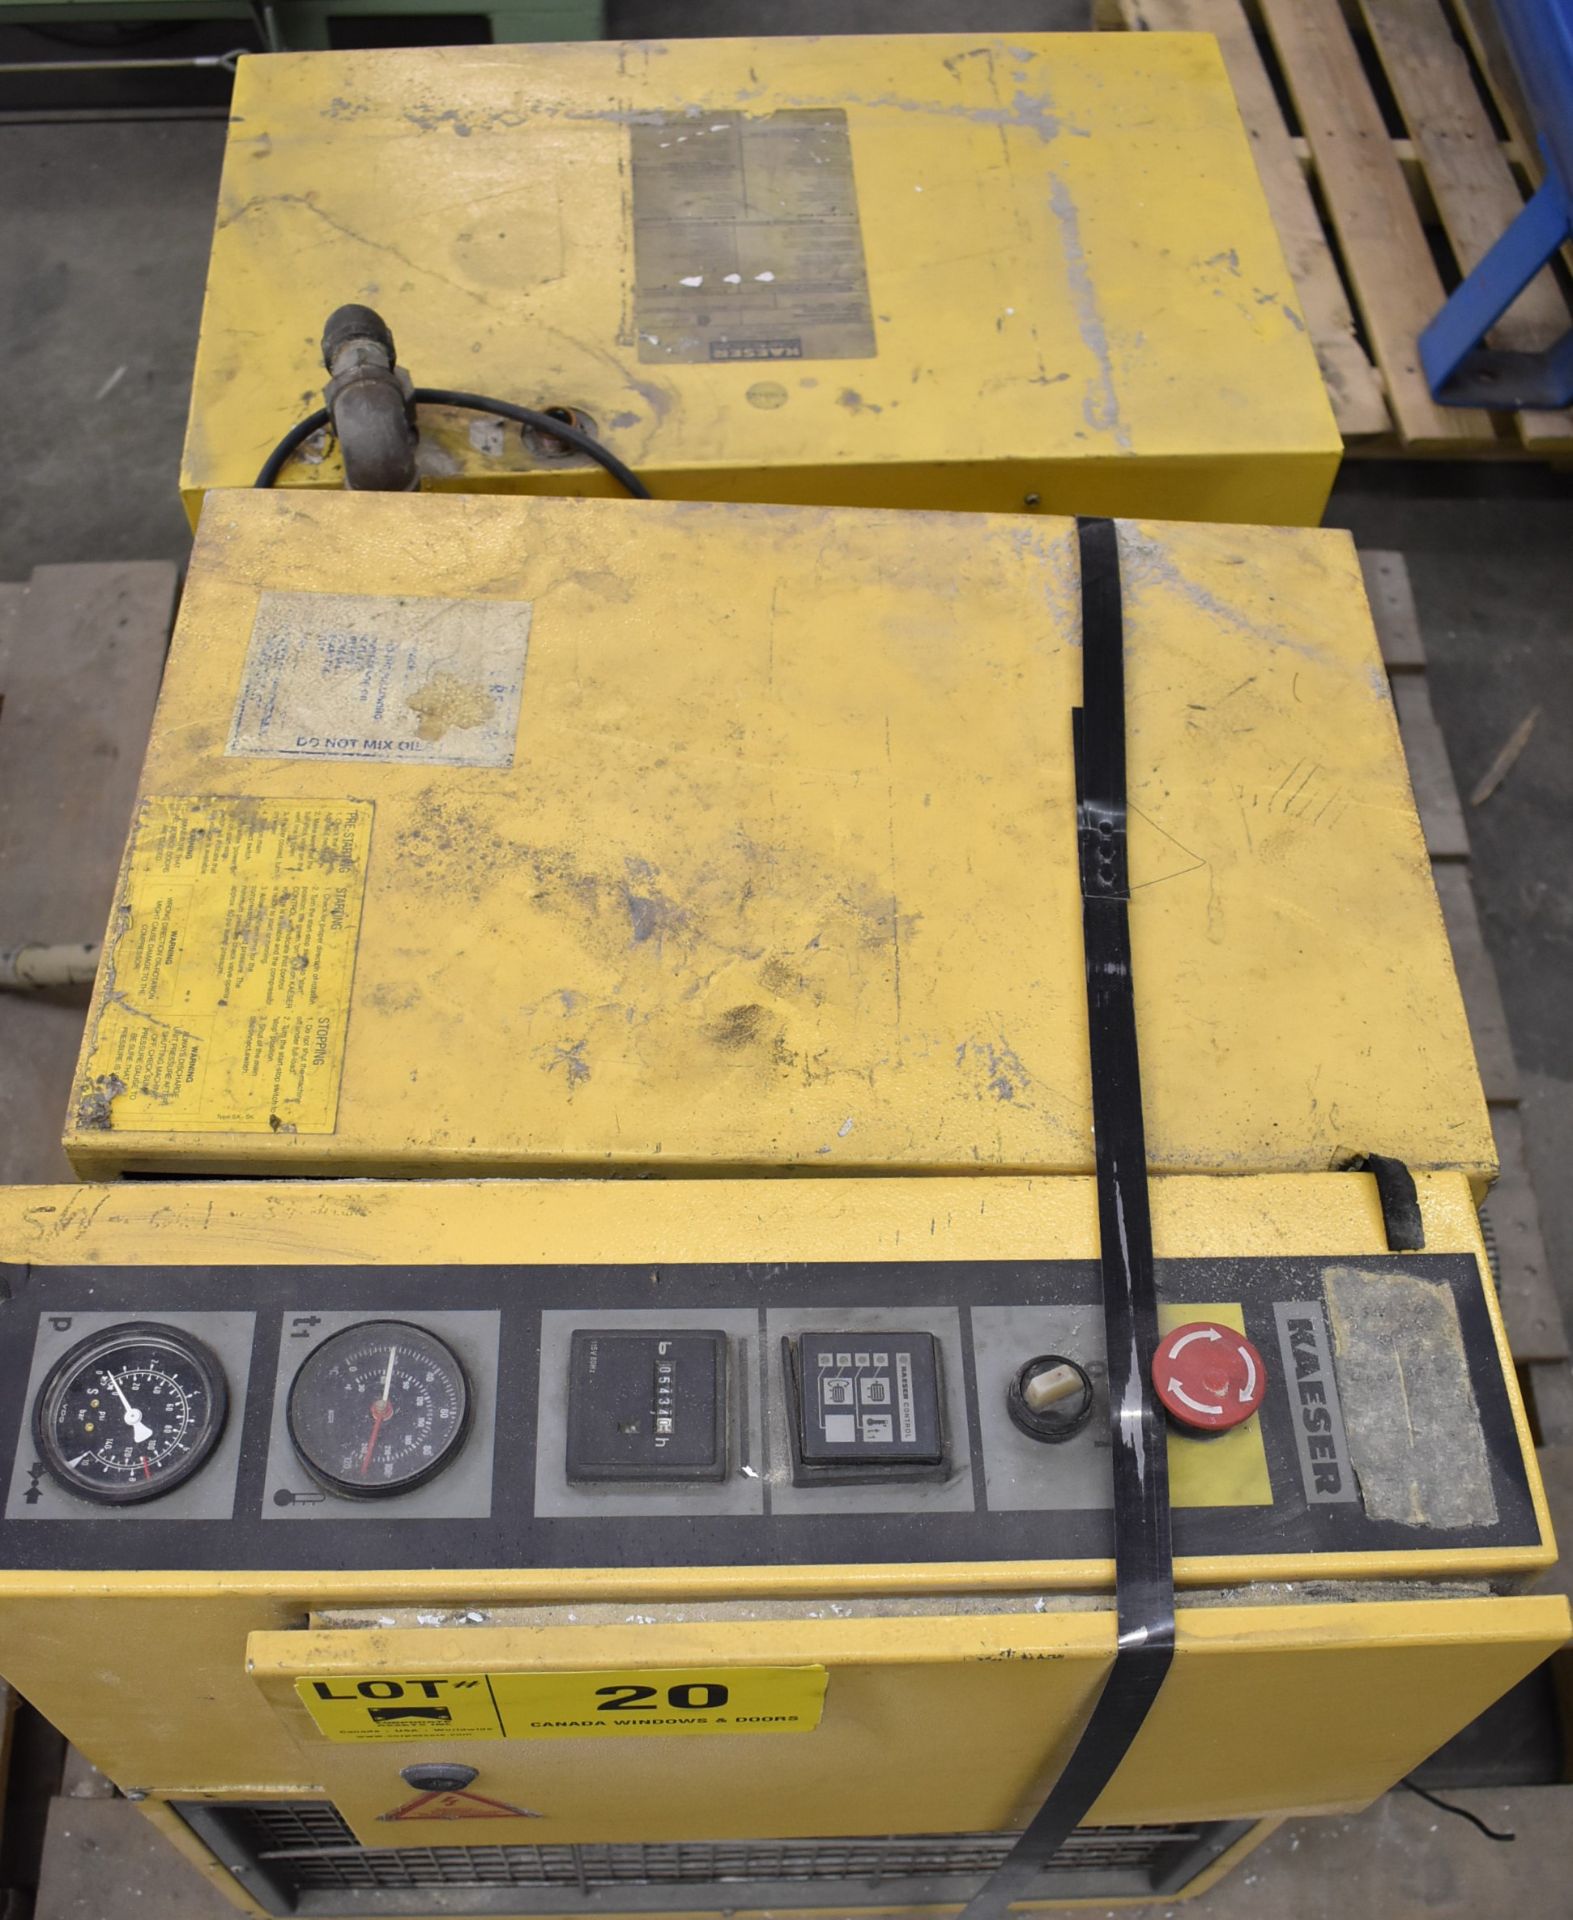 LOT/ KAESER ROTARY SCREW COMPRESSOR WITH 5,434 HOURS (RECORED ON METER AT TIME OF LISTING) AND